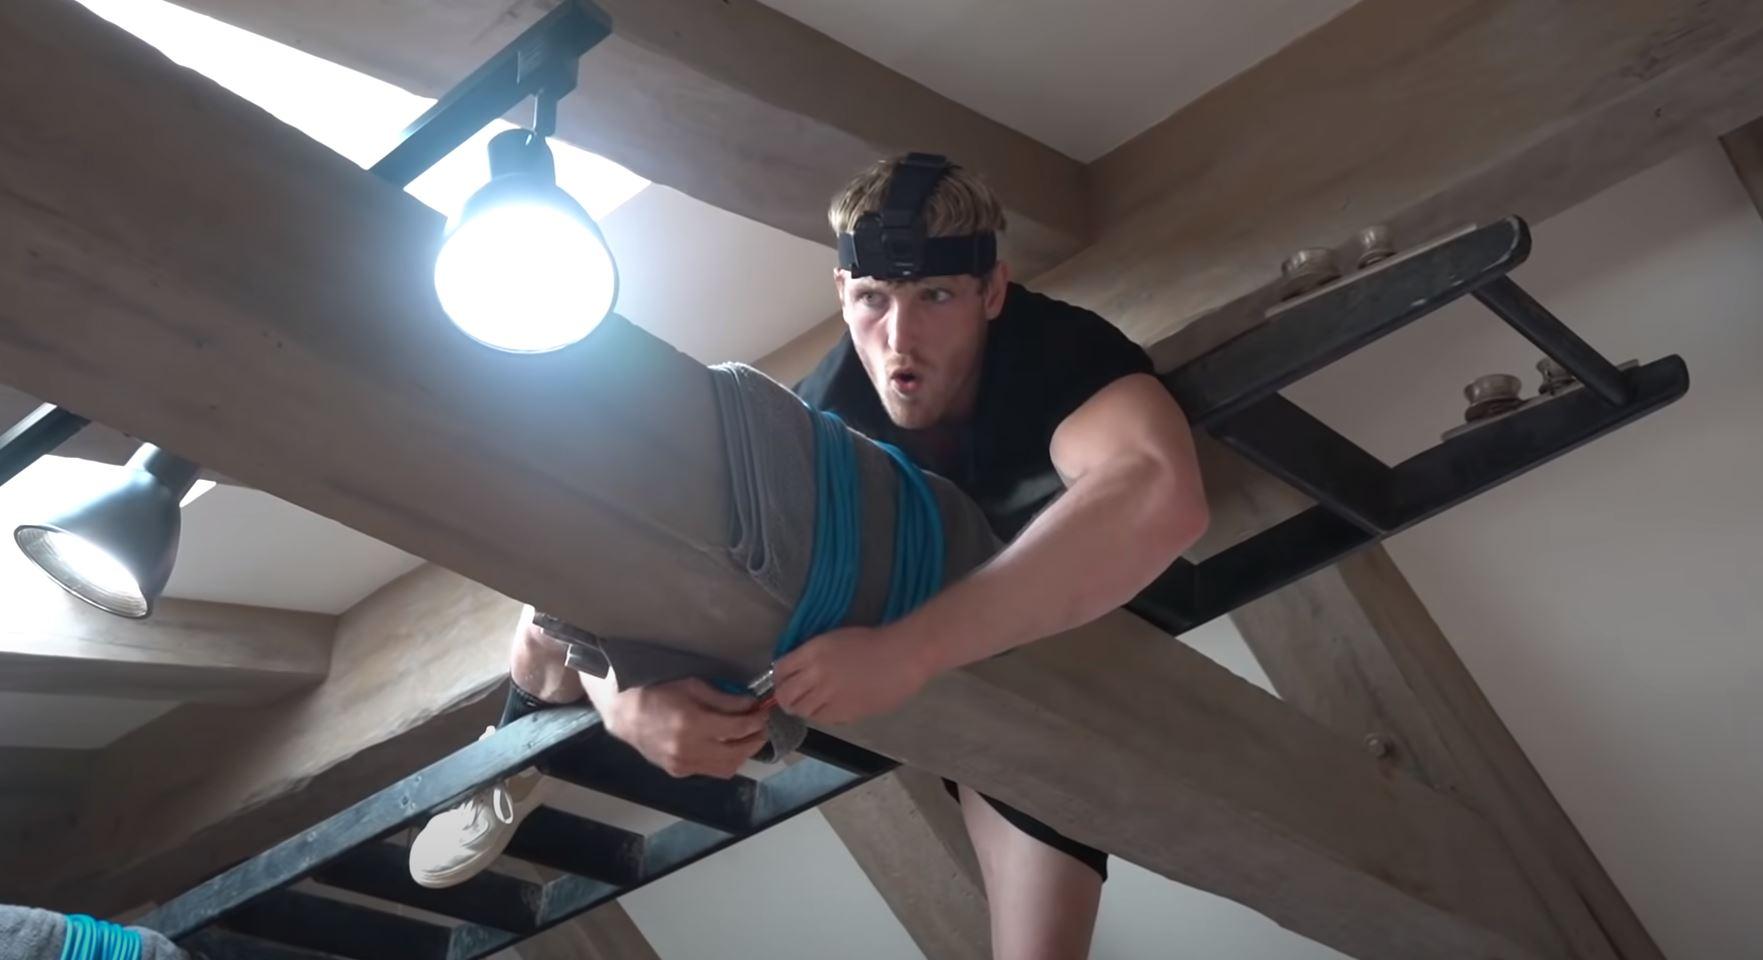 Logan Paul secures a bungee cord to a beam on his ceiling - just before he accidentally took out a lamp.